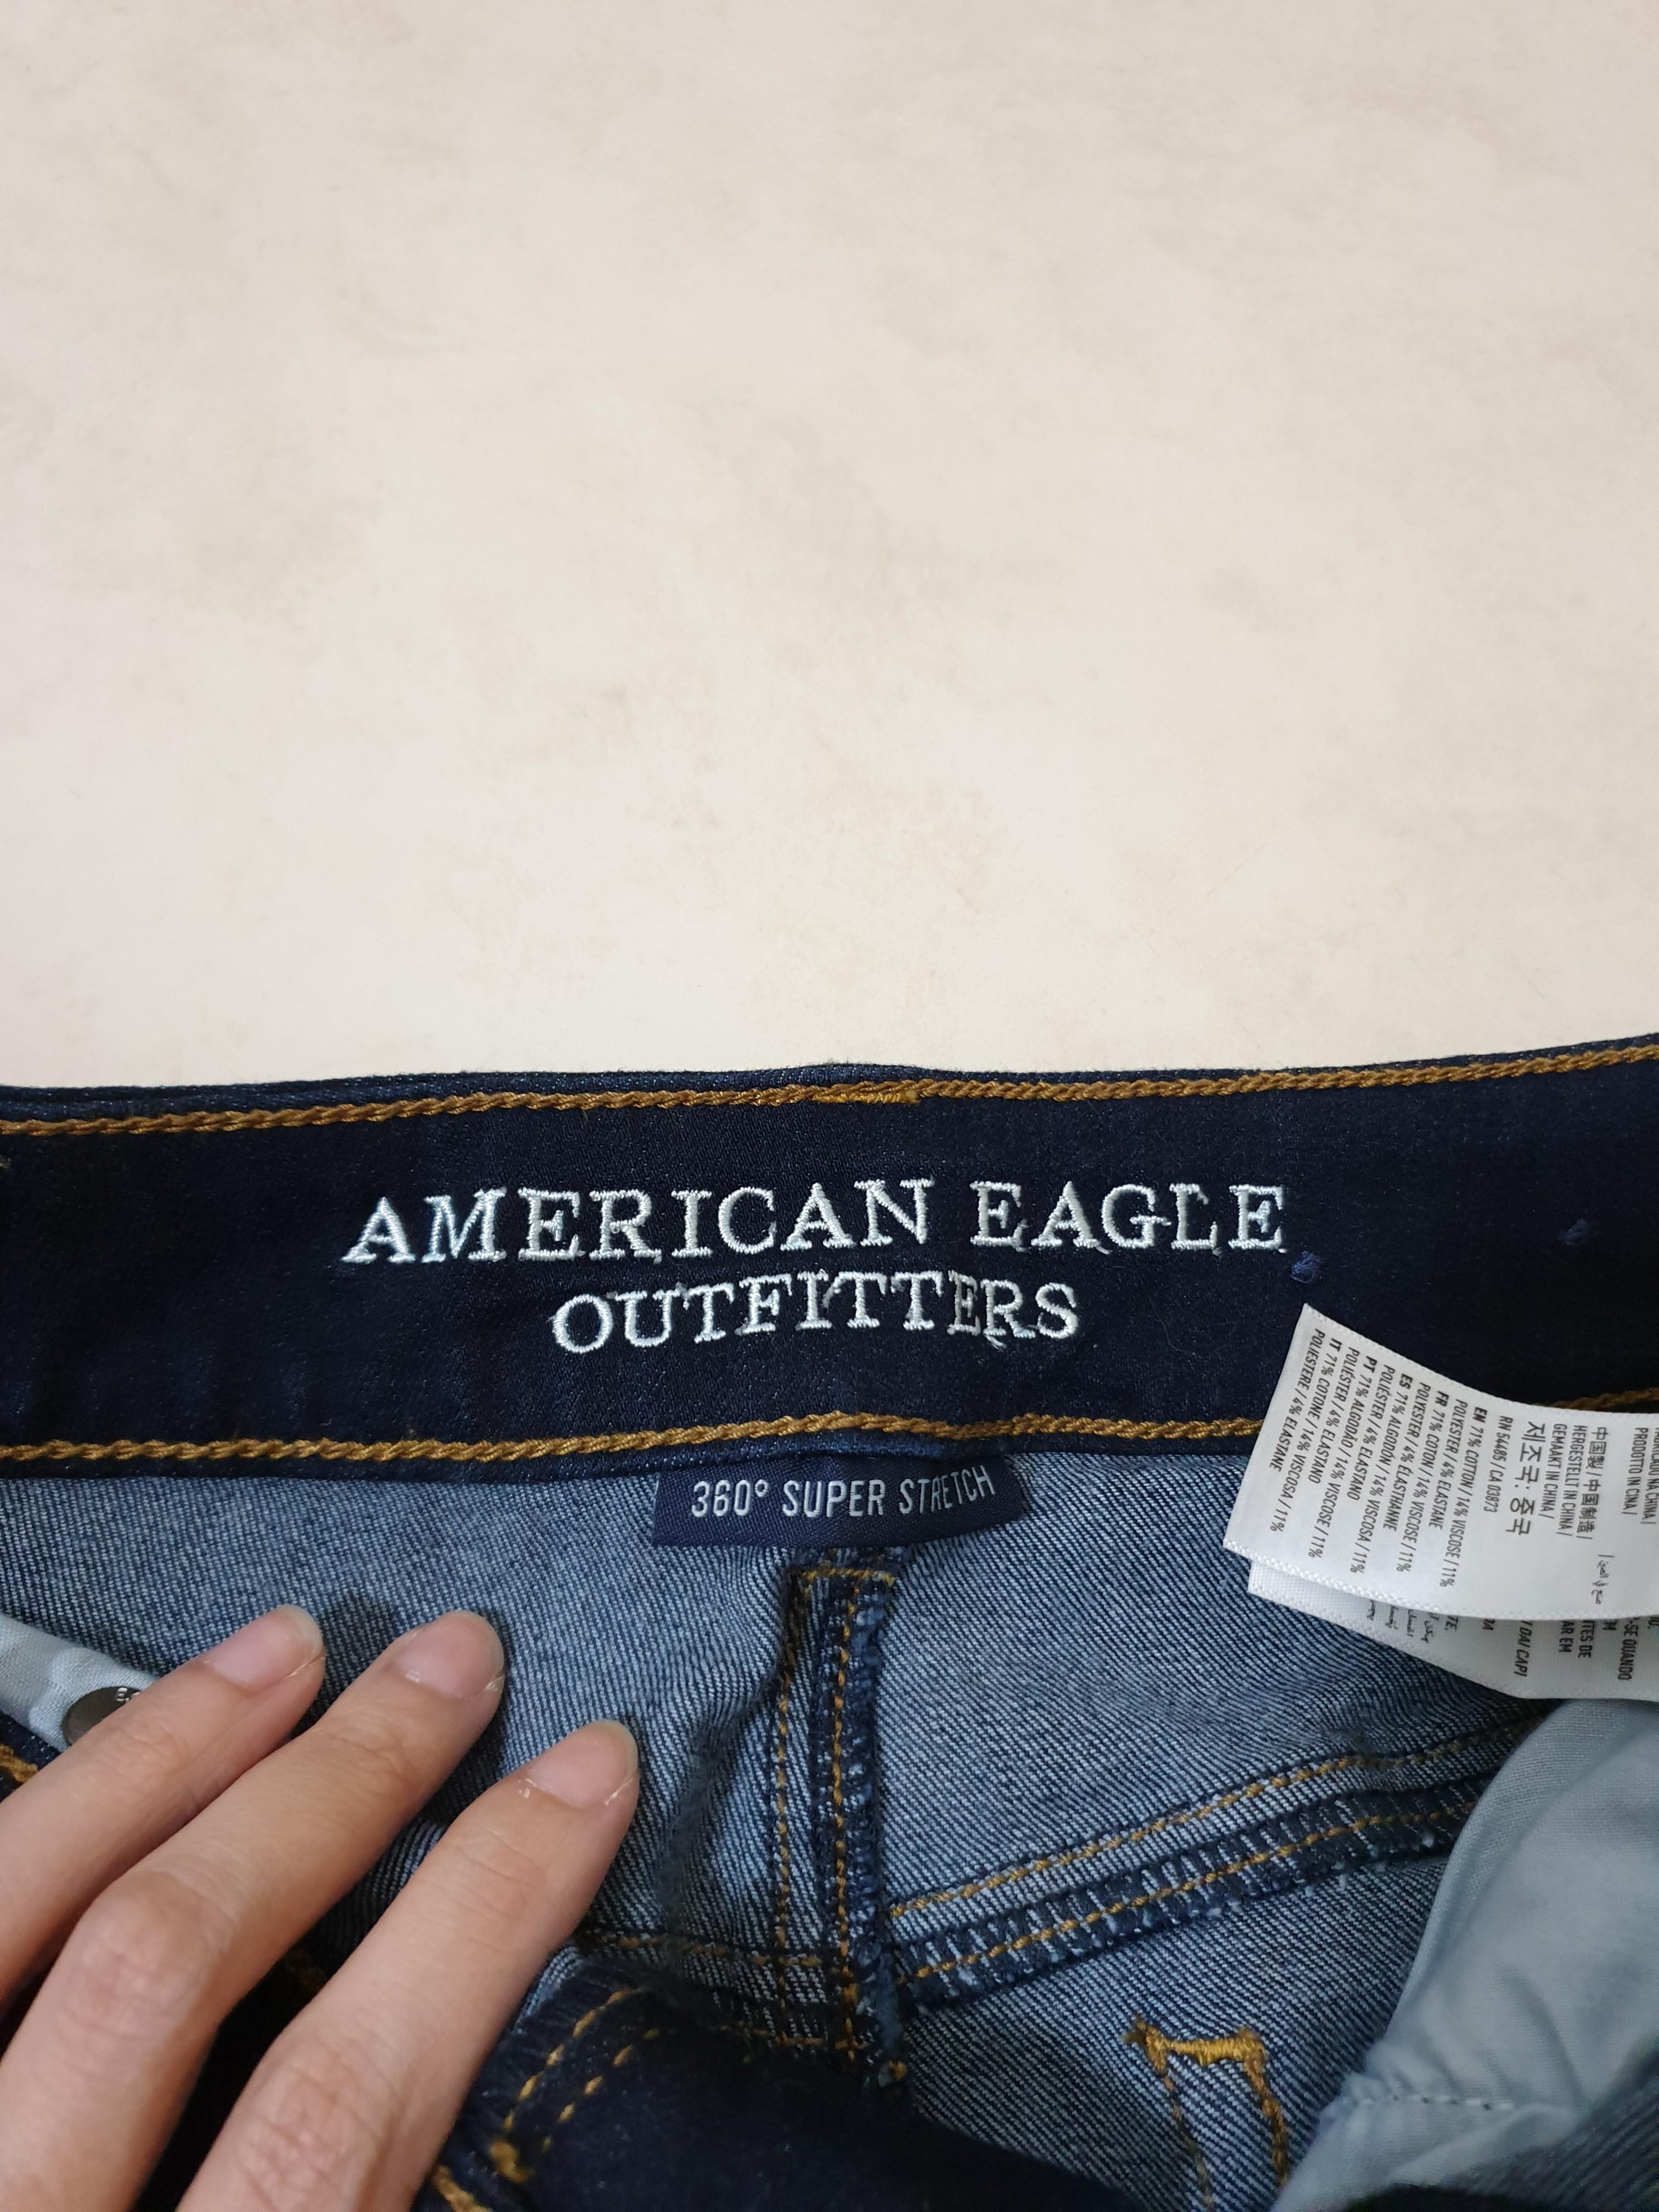 Eagle Gallery: American Eagle Outfitters 54485